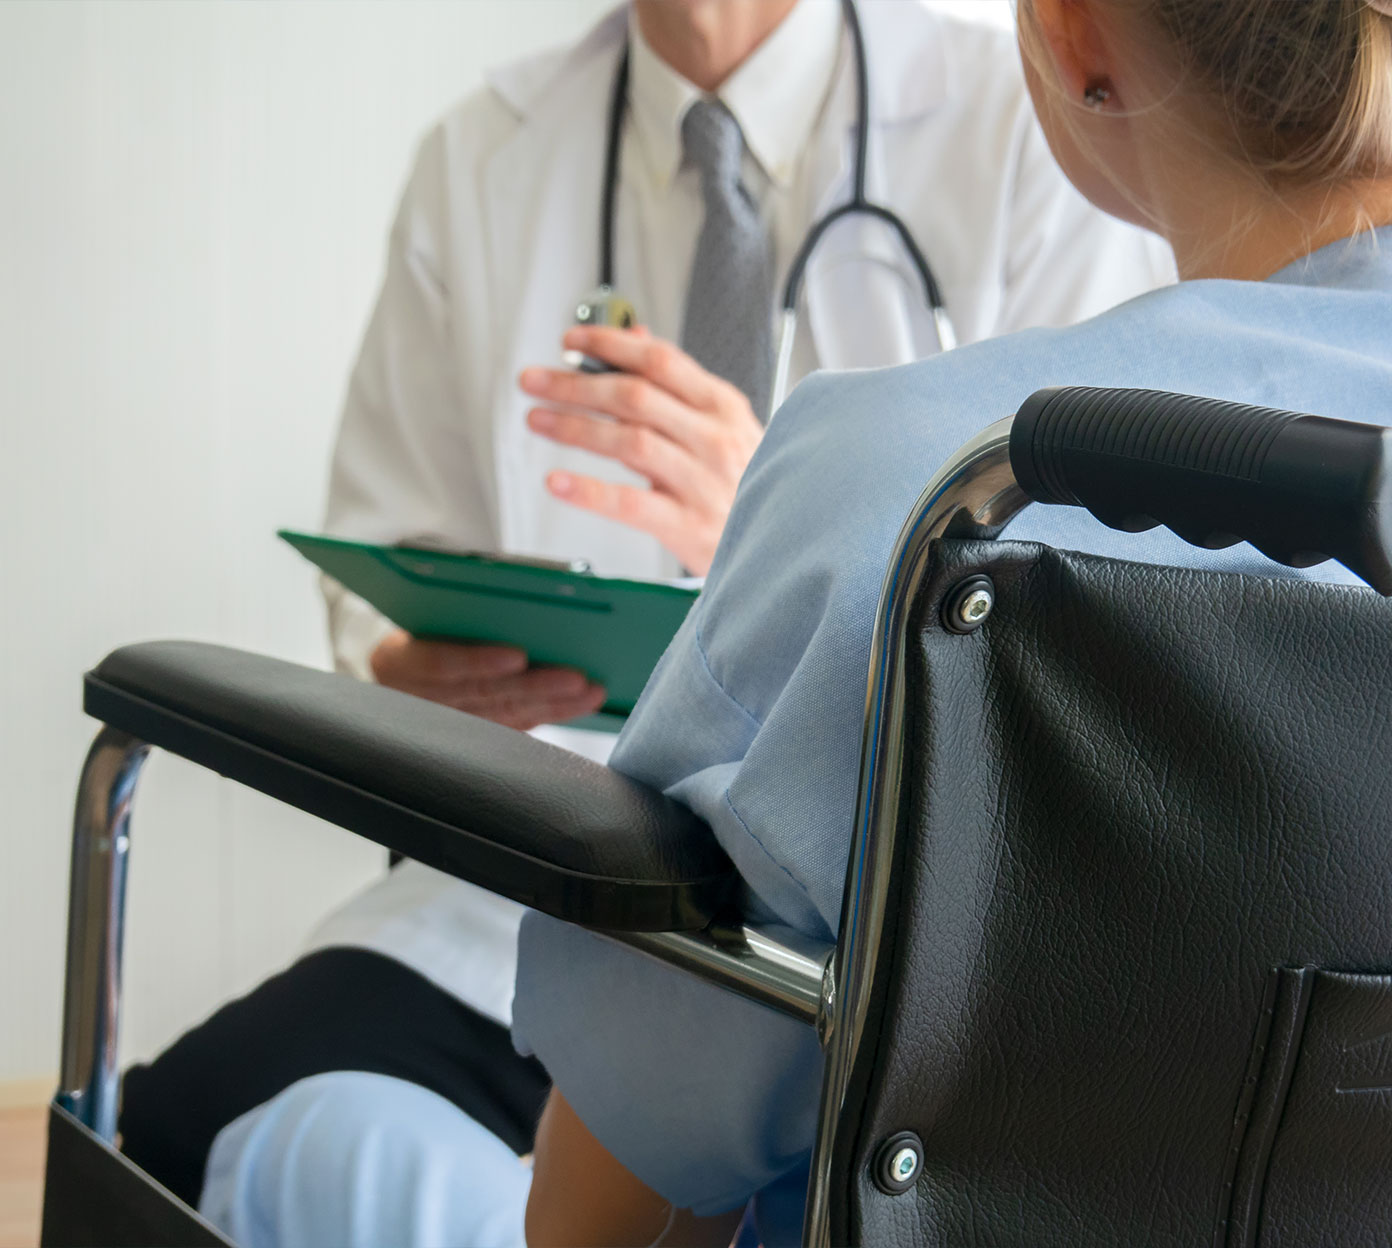 Physician sits in front of a patient holding paperwork